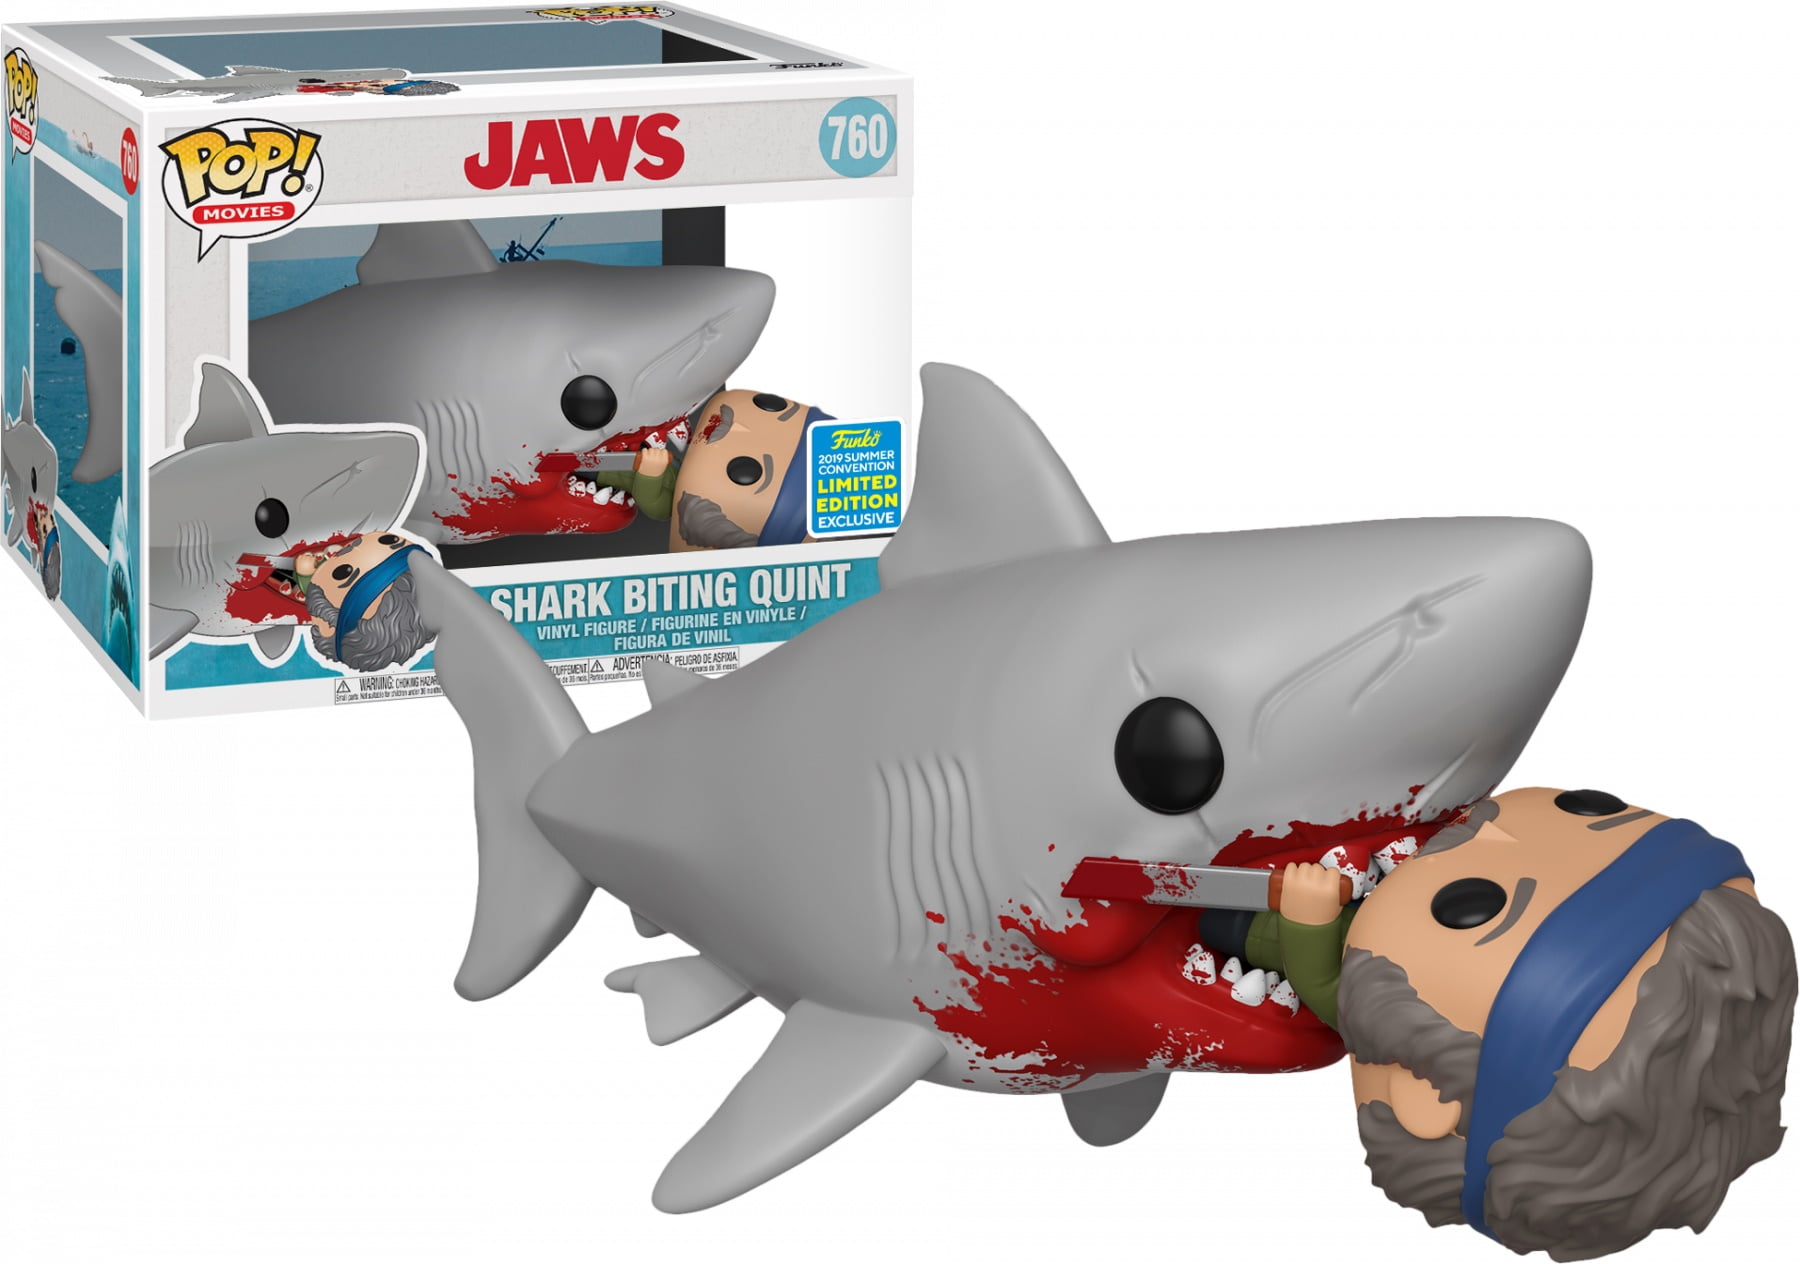 FunKo POP! Movies Jaws: Shark Biting Quint Figure - 2019 Convention  Exclusive 